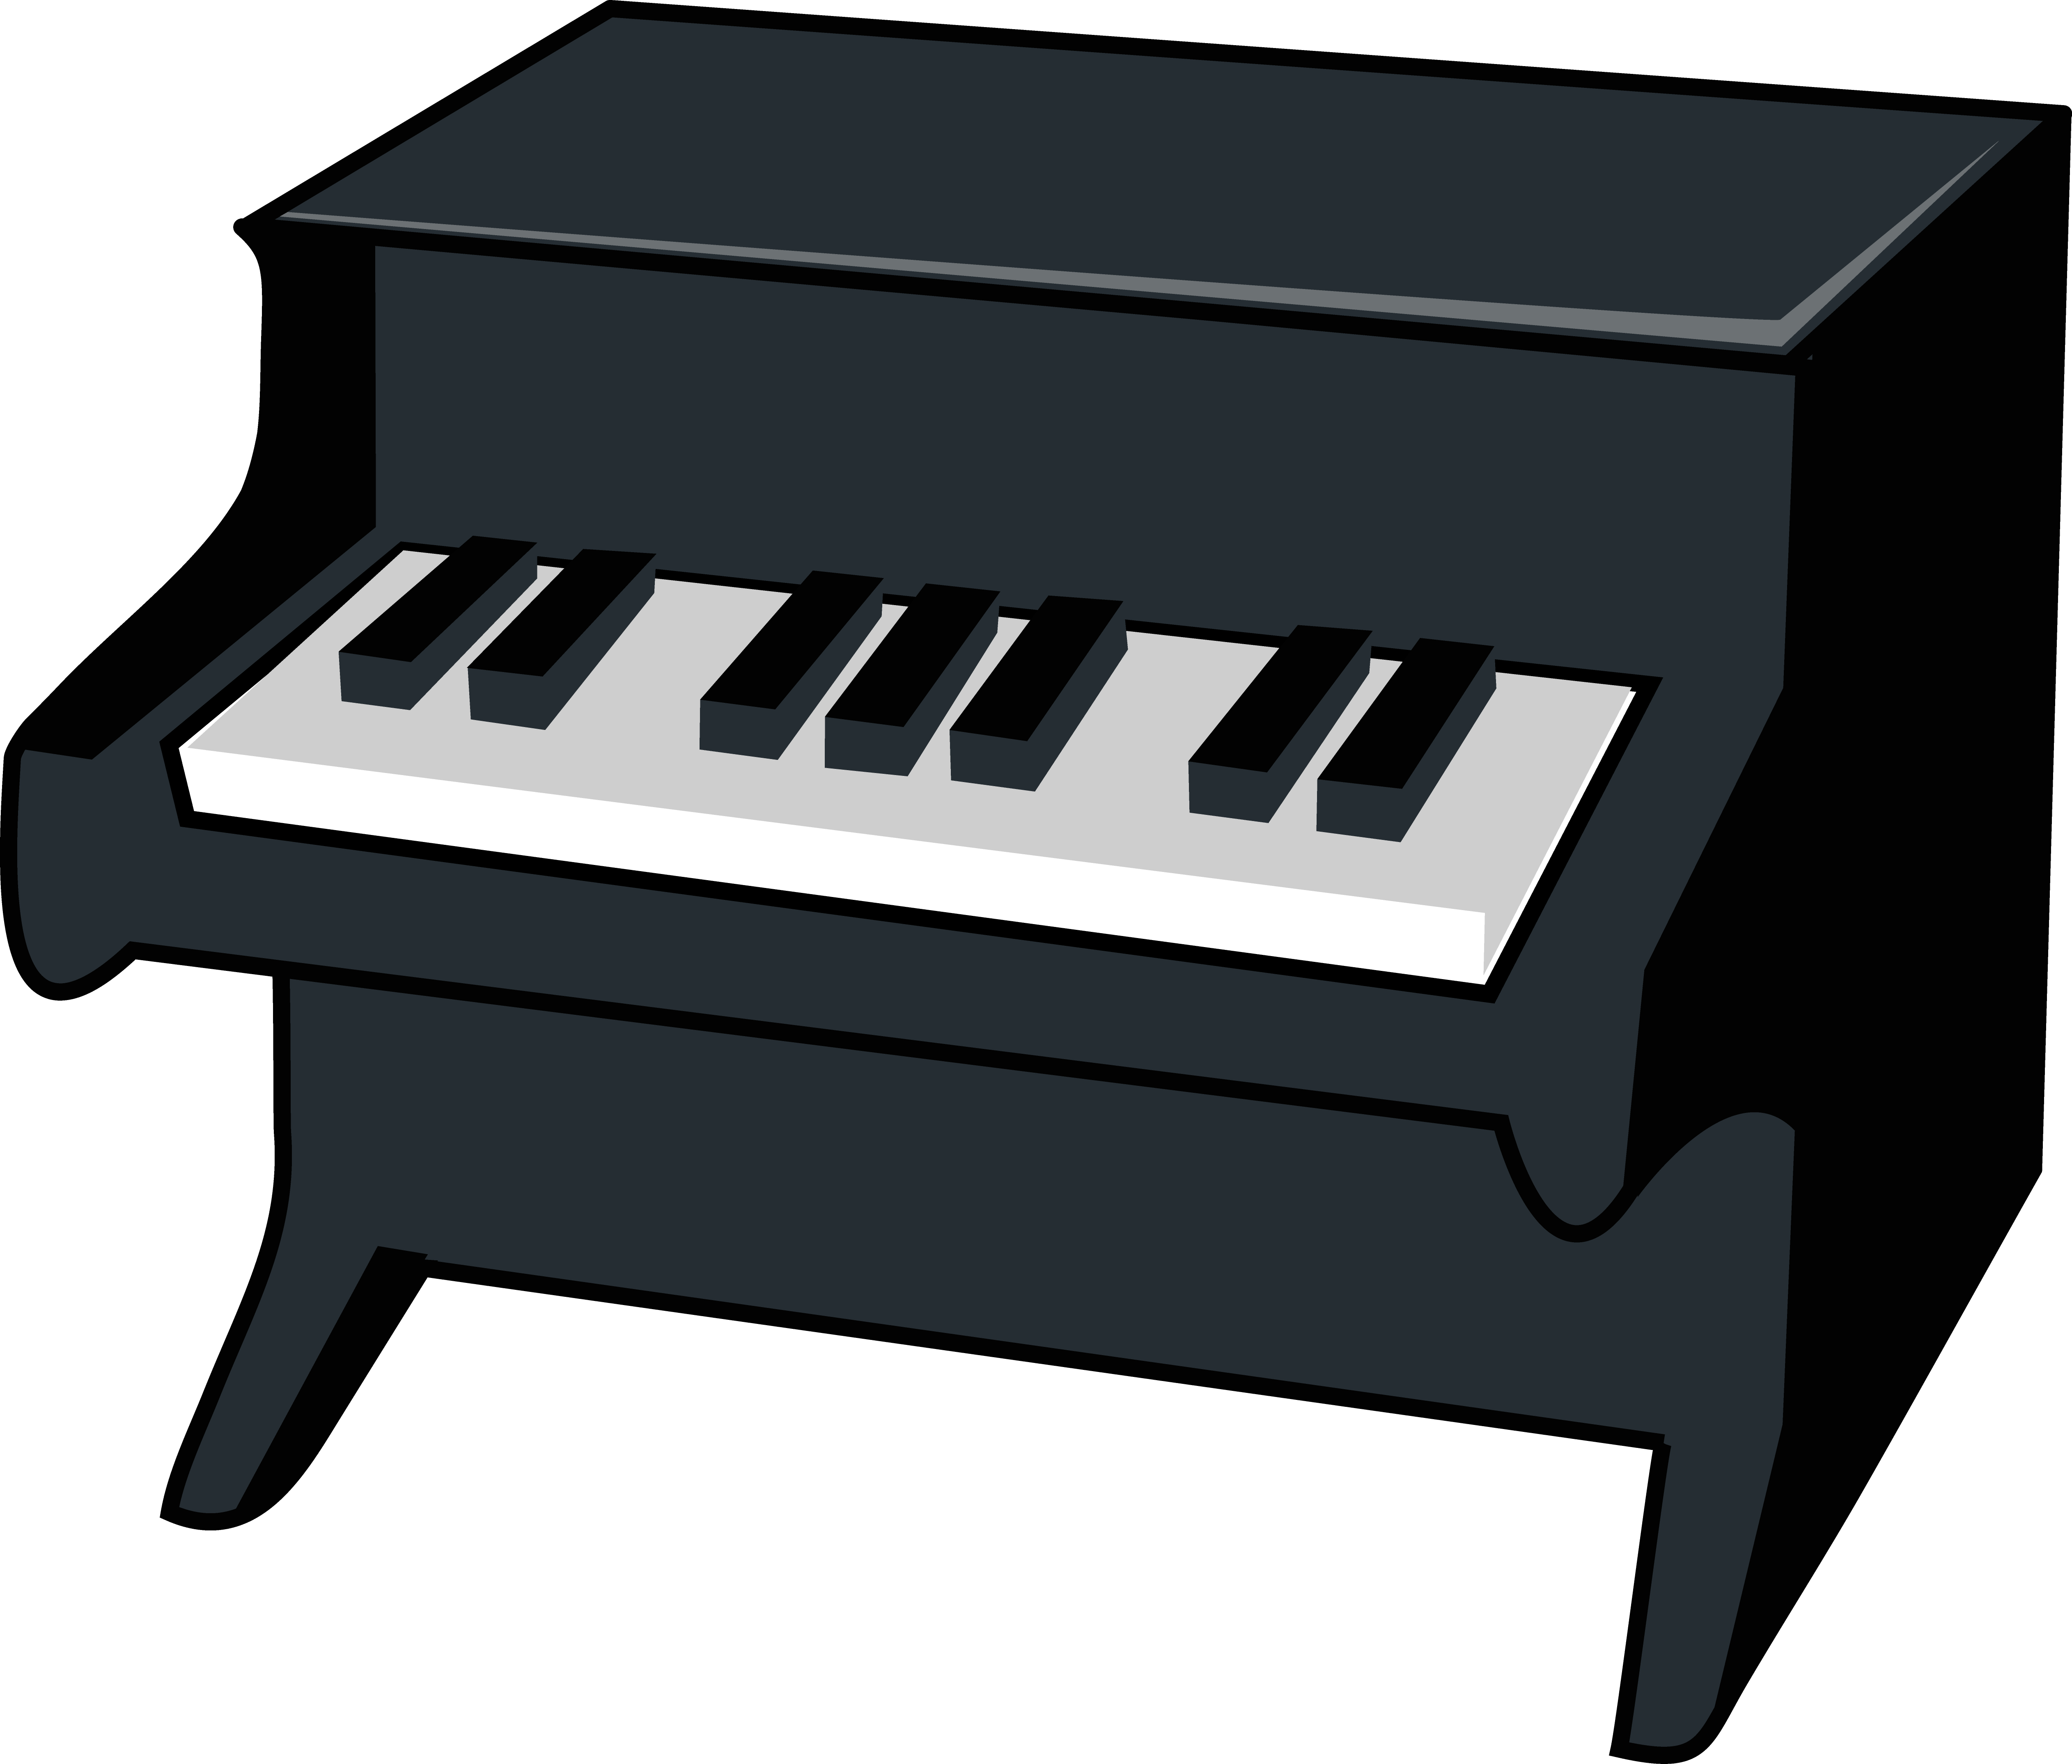 Piano clip art free download free clipart images 2